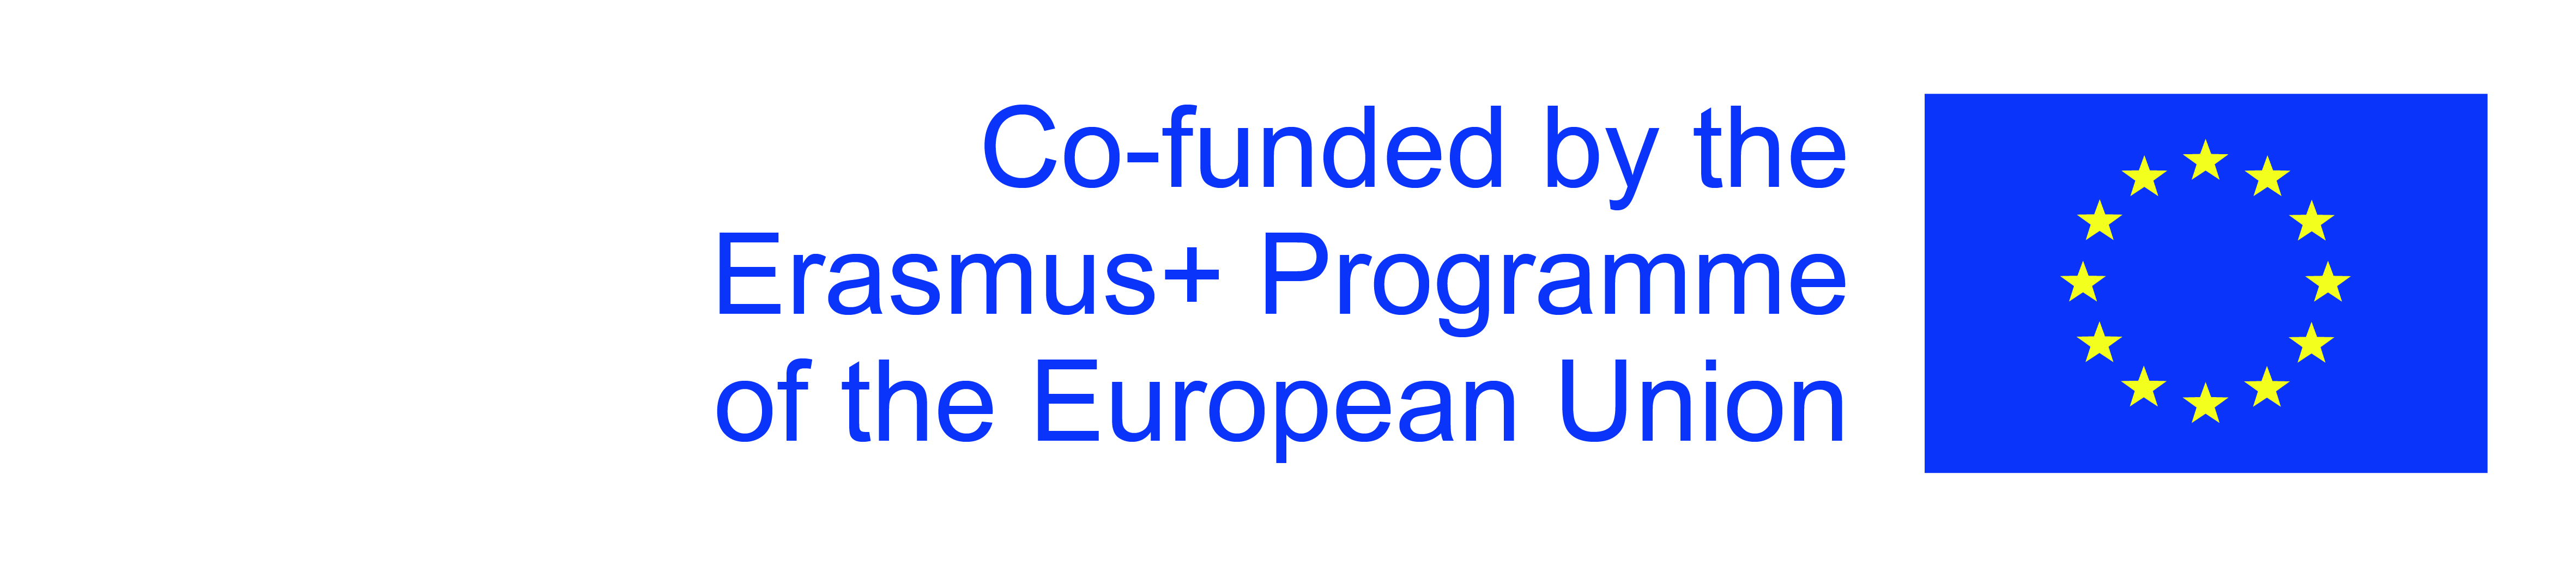 Co-funded by Erasmus+ Programme